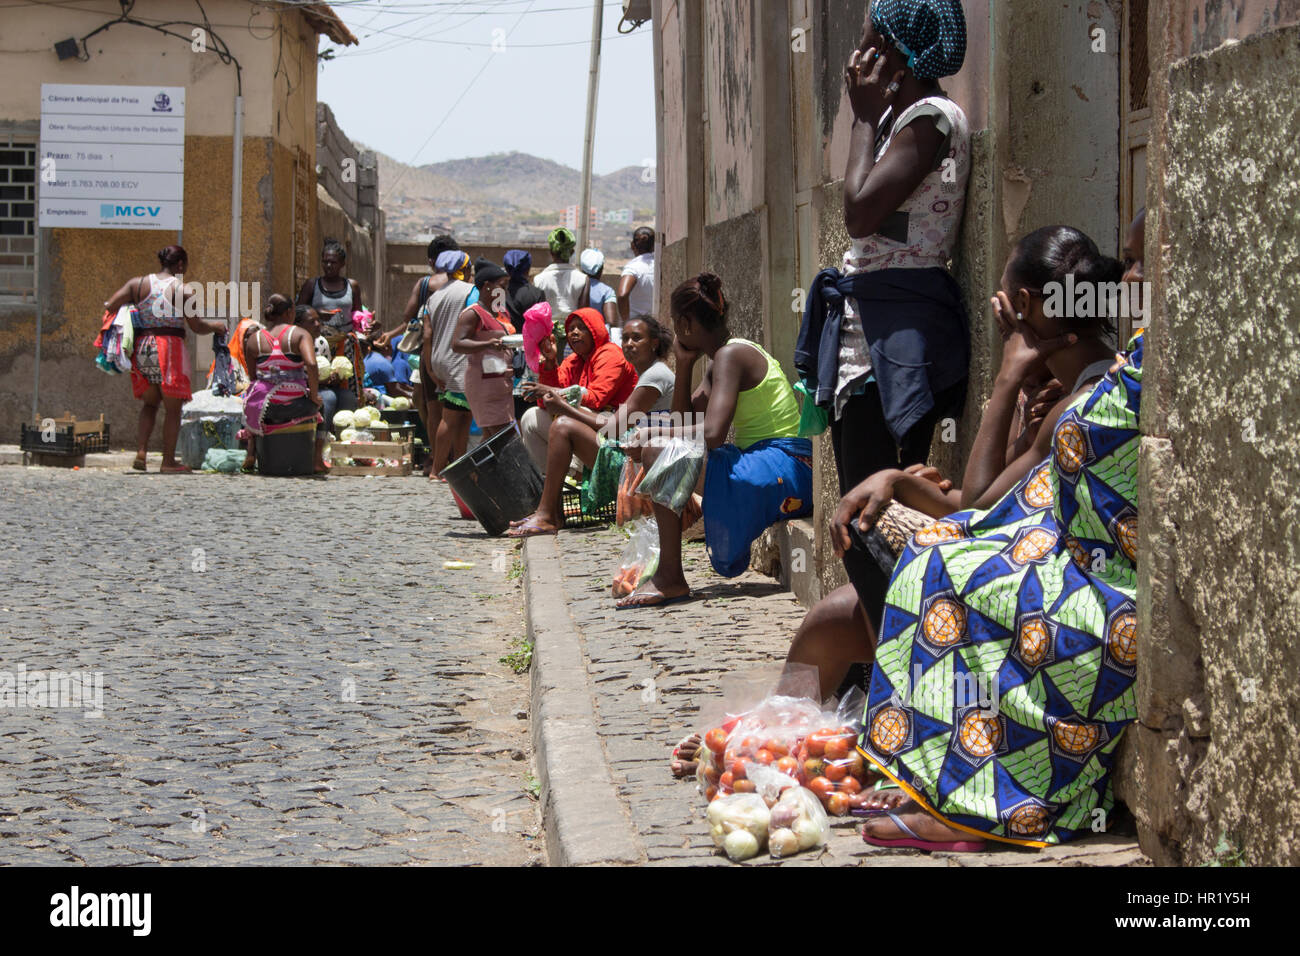 African women selling fruits and vegetables outdoors market in Praia, Cape Verde. Stock Photo